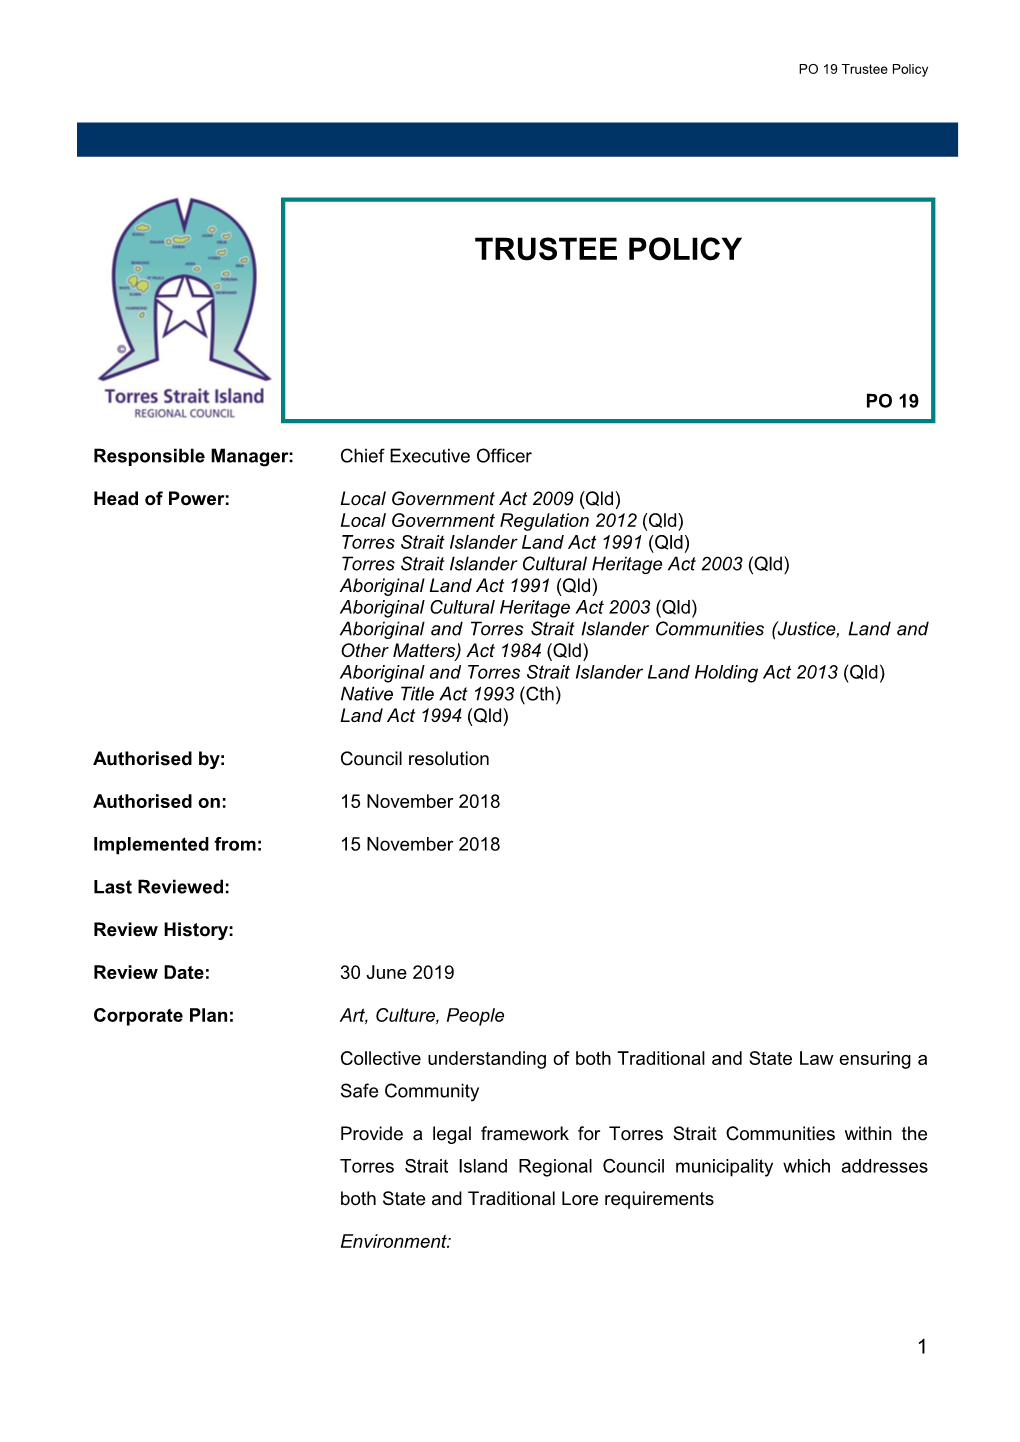 Trustee Policy